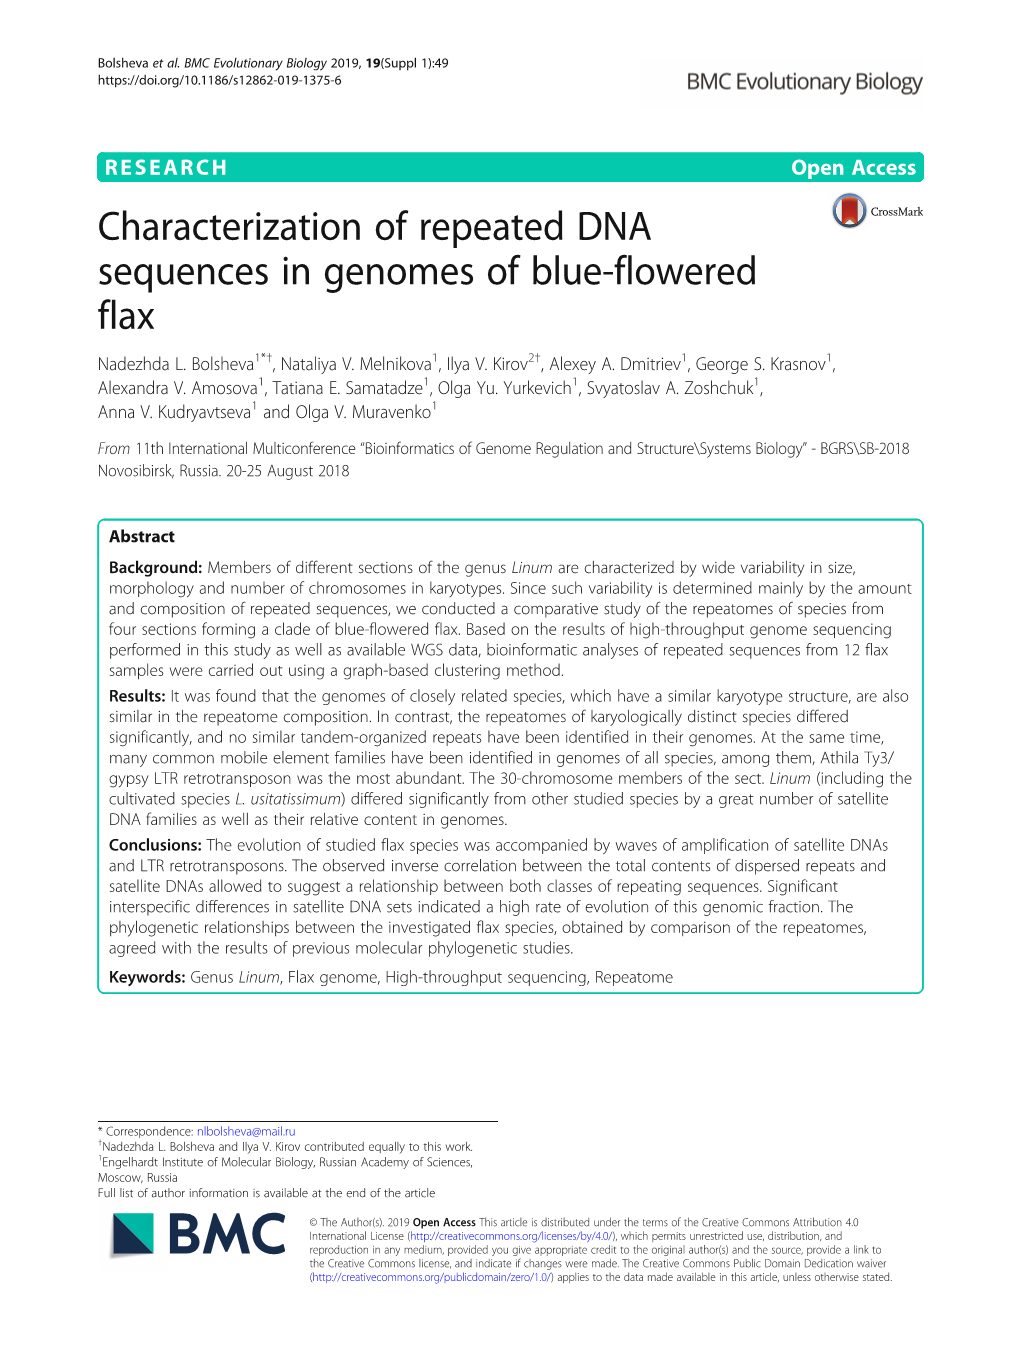 Characterization of Repeated DNA Sequences in Genomes of Blue-Flowered Flax Nadezhda L